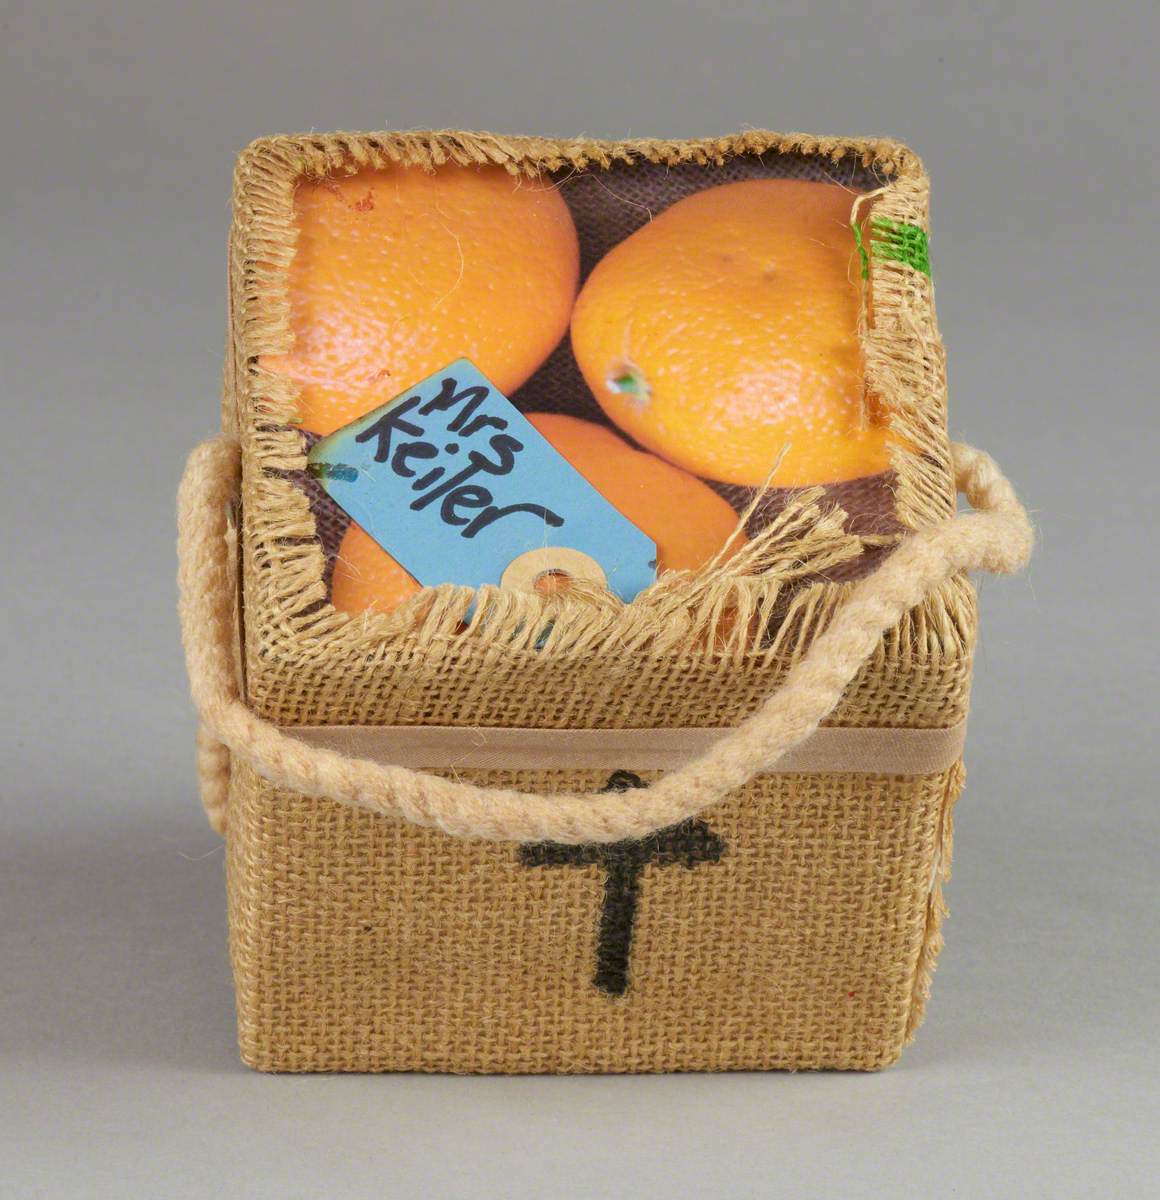 121 Linked Cubes: Cube wrapped in Jute with the Top Showing an Image of Oranges